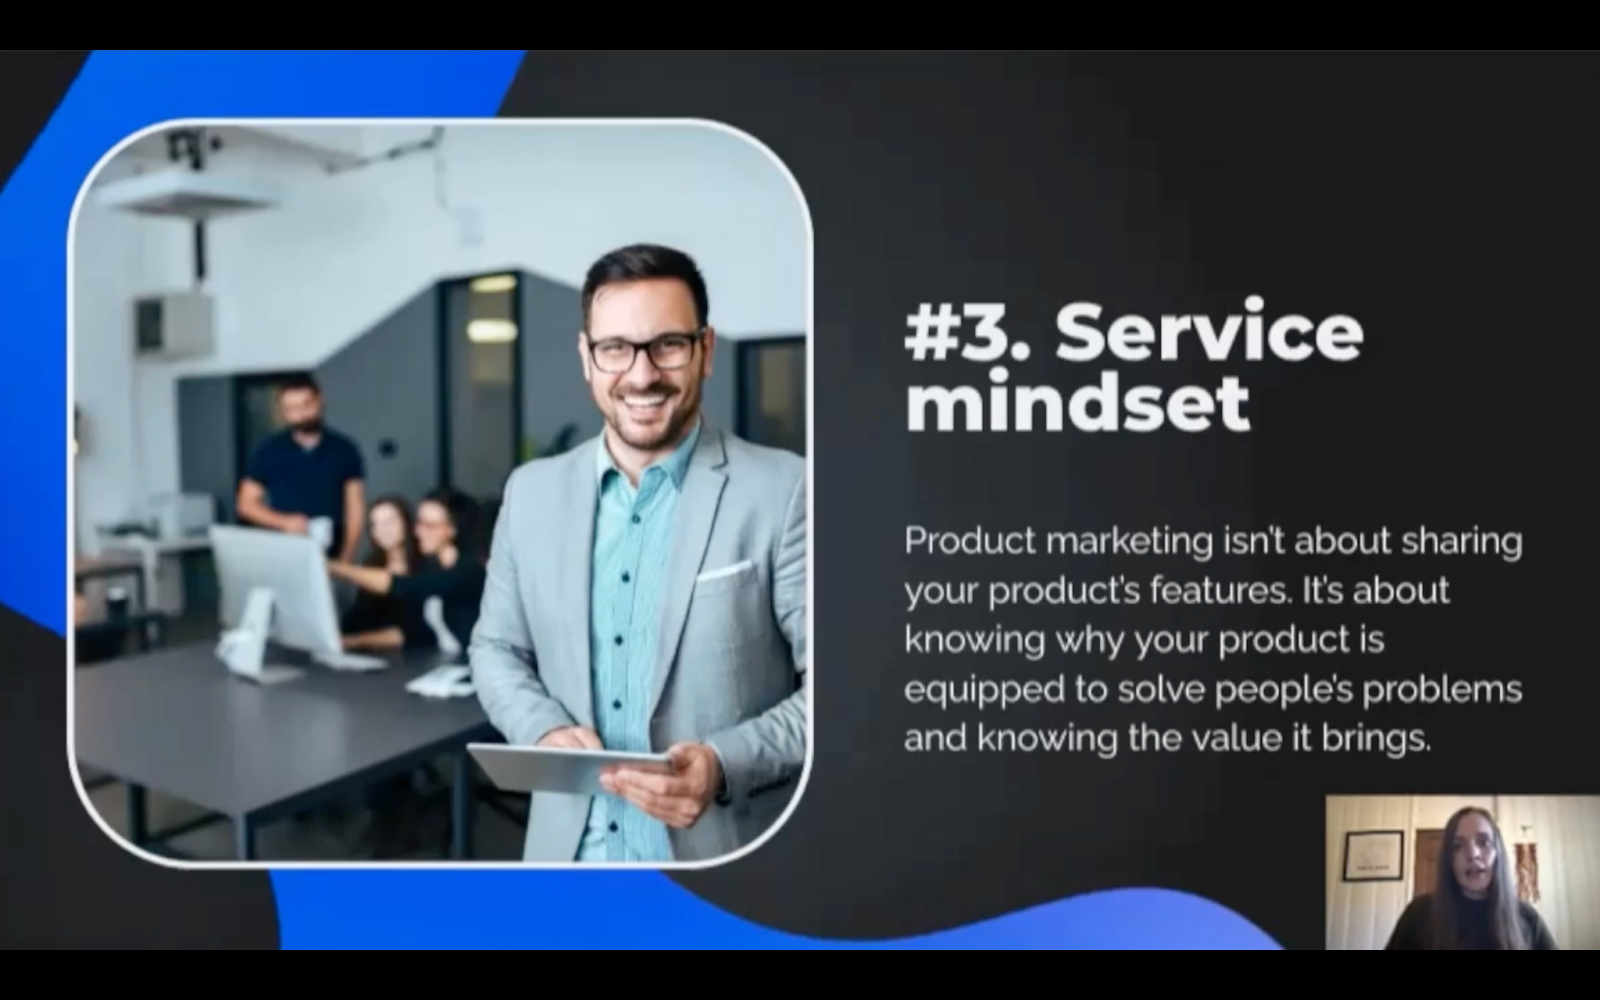 Service mindset - product marketing isn't about hsaring your product's features. It's about knowing why your product is equipped to solve people's problems and knowing the value it brings. 